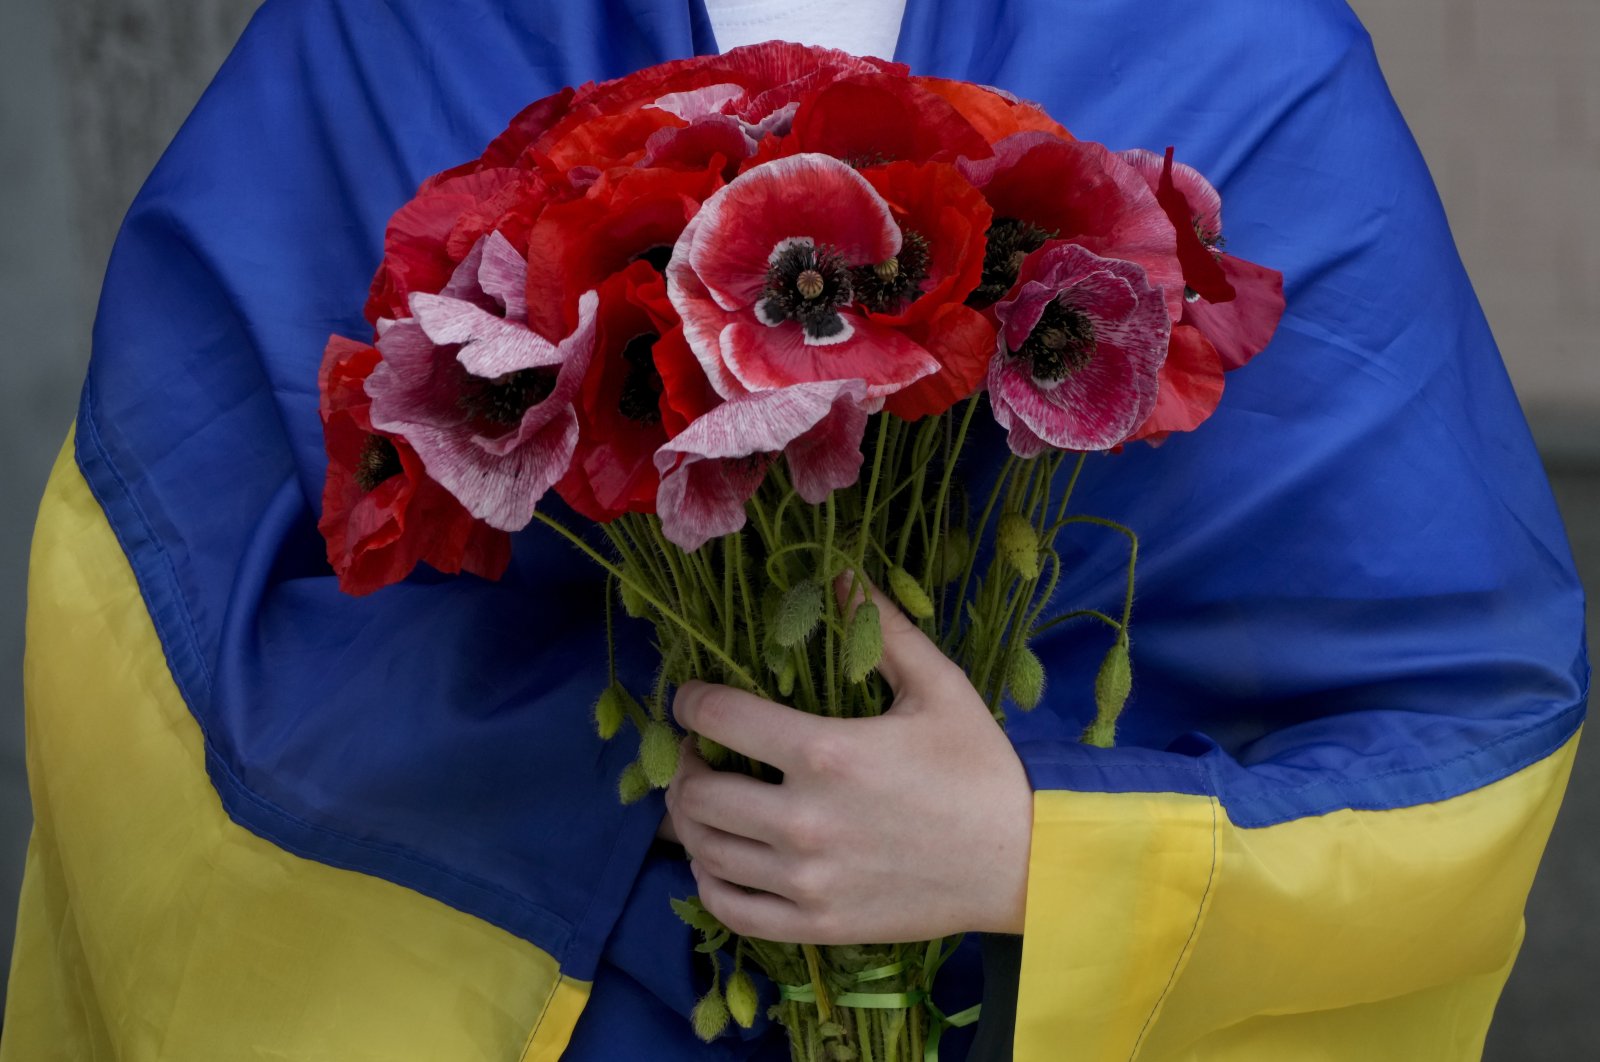 A woman wrapped in a Ukrainian flag holds flowers during the memorial service of activist and soldier Roman Ratushnyi in Kyiv, Ukraine, June 18, 2022. (AP Photo)